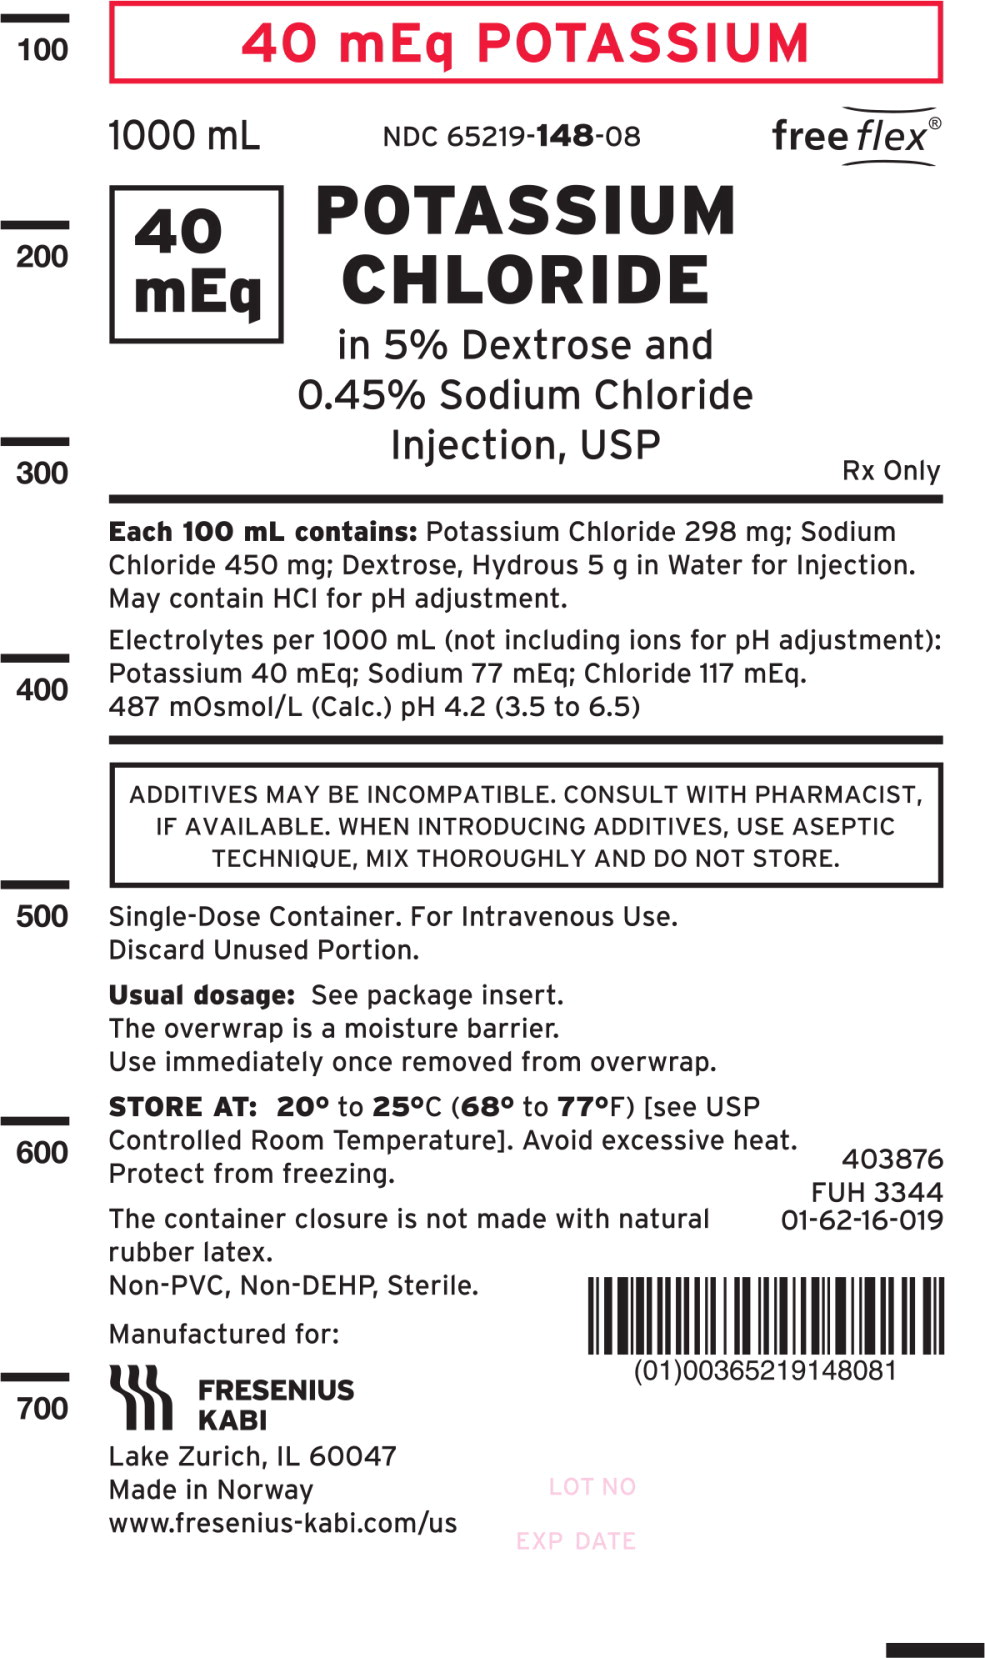 PACKAGE LABEL - PRINCIPAL DISPLAY – 40 mEq POTASSIUM CHLORIDE in 5% Dextrose and 0.45% Sodium Chloride Injection, USP 1000 mL Bag Label
